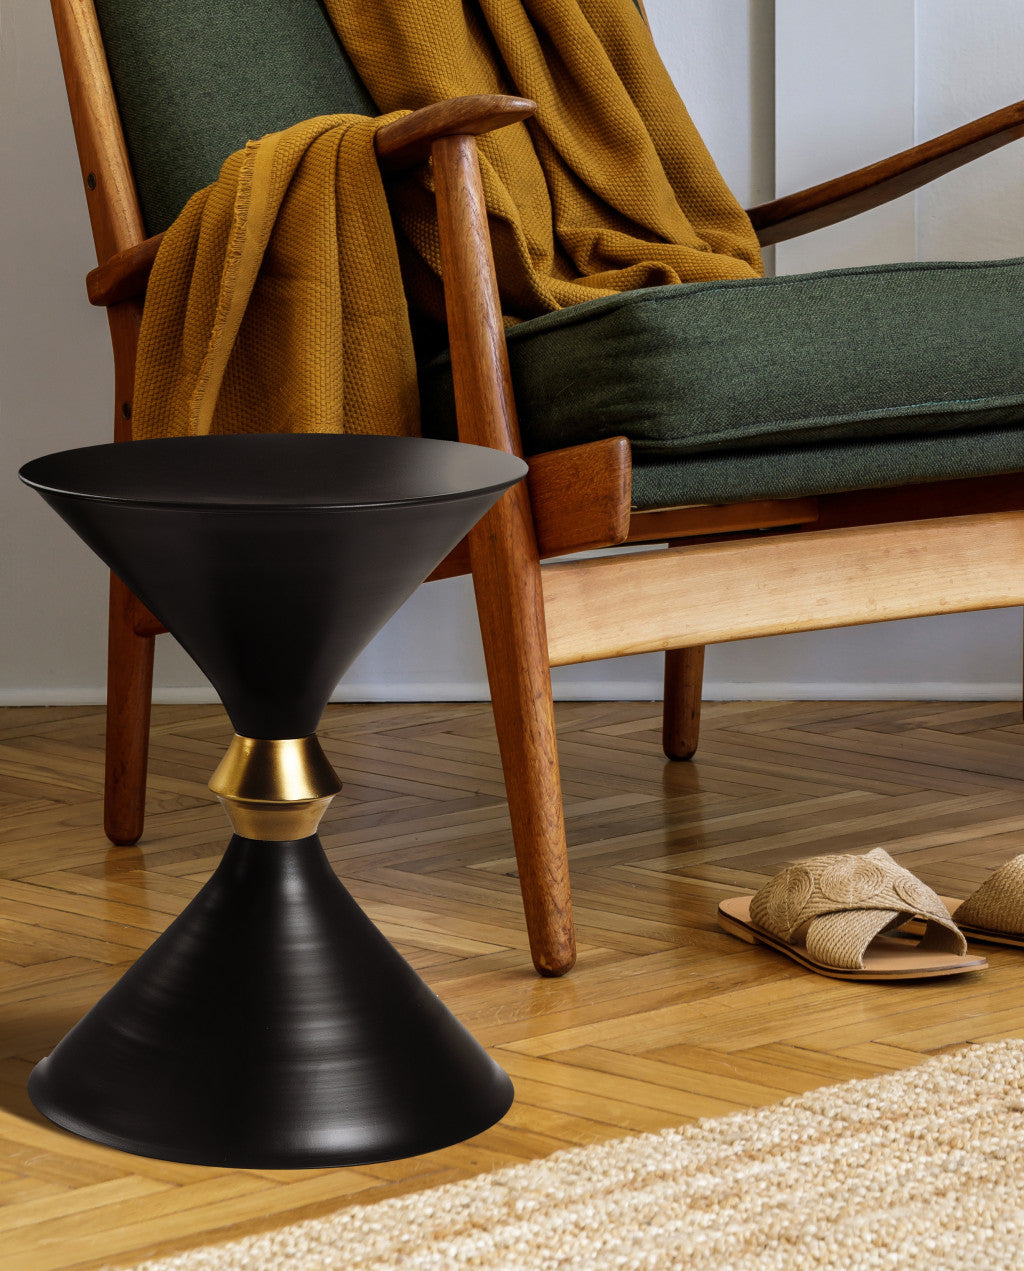 18" Black Iron Free Form End Table By Homeroots